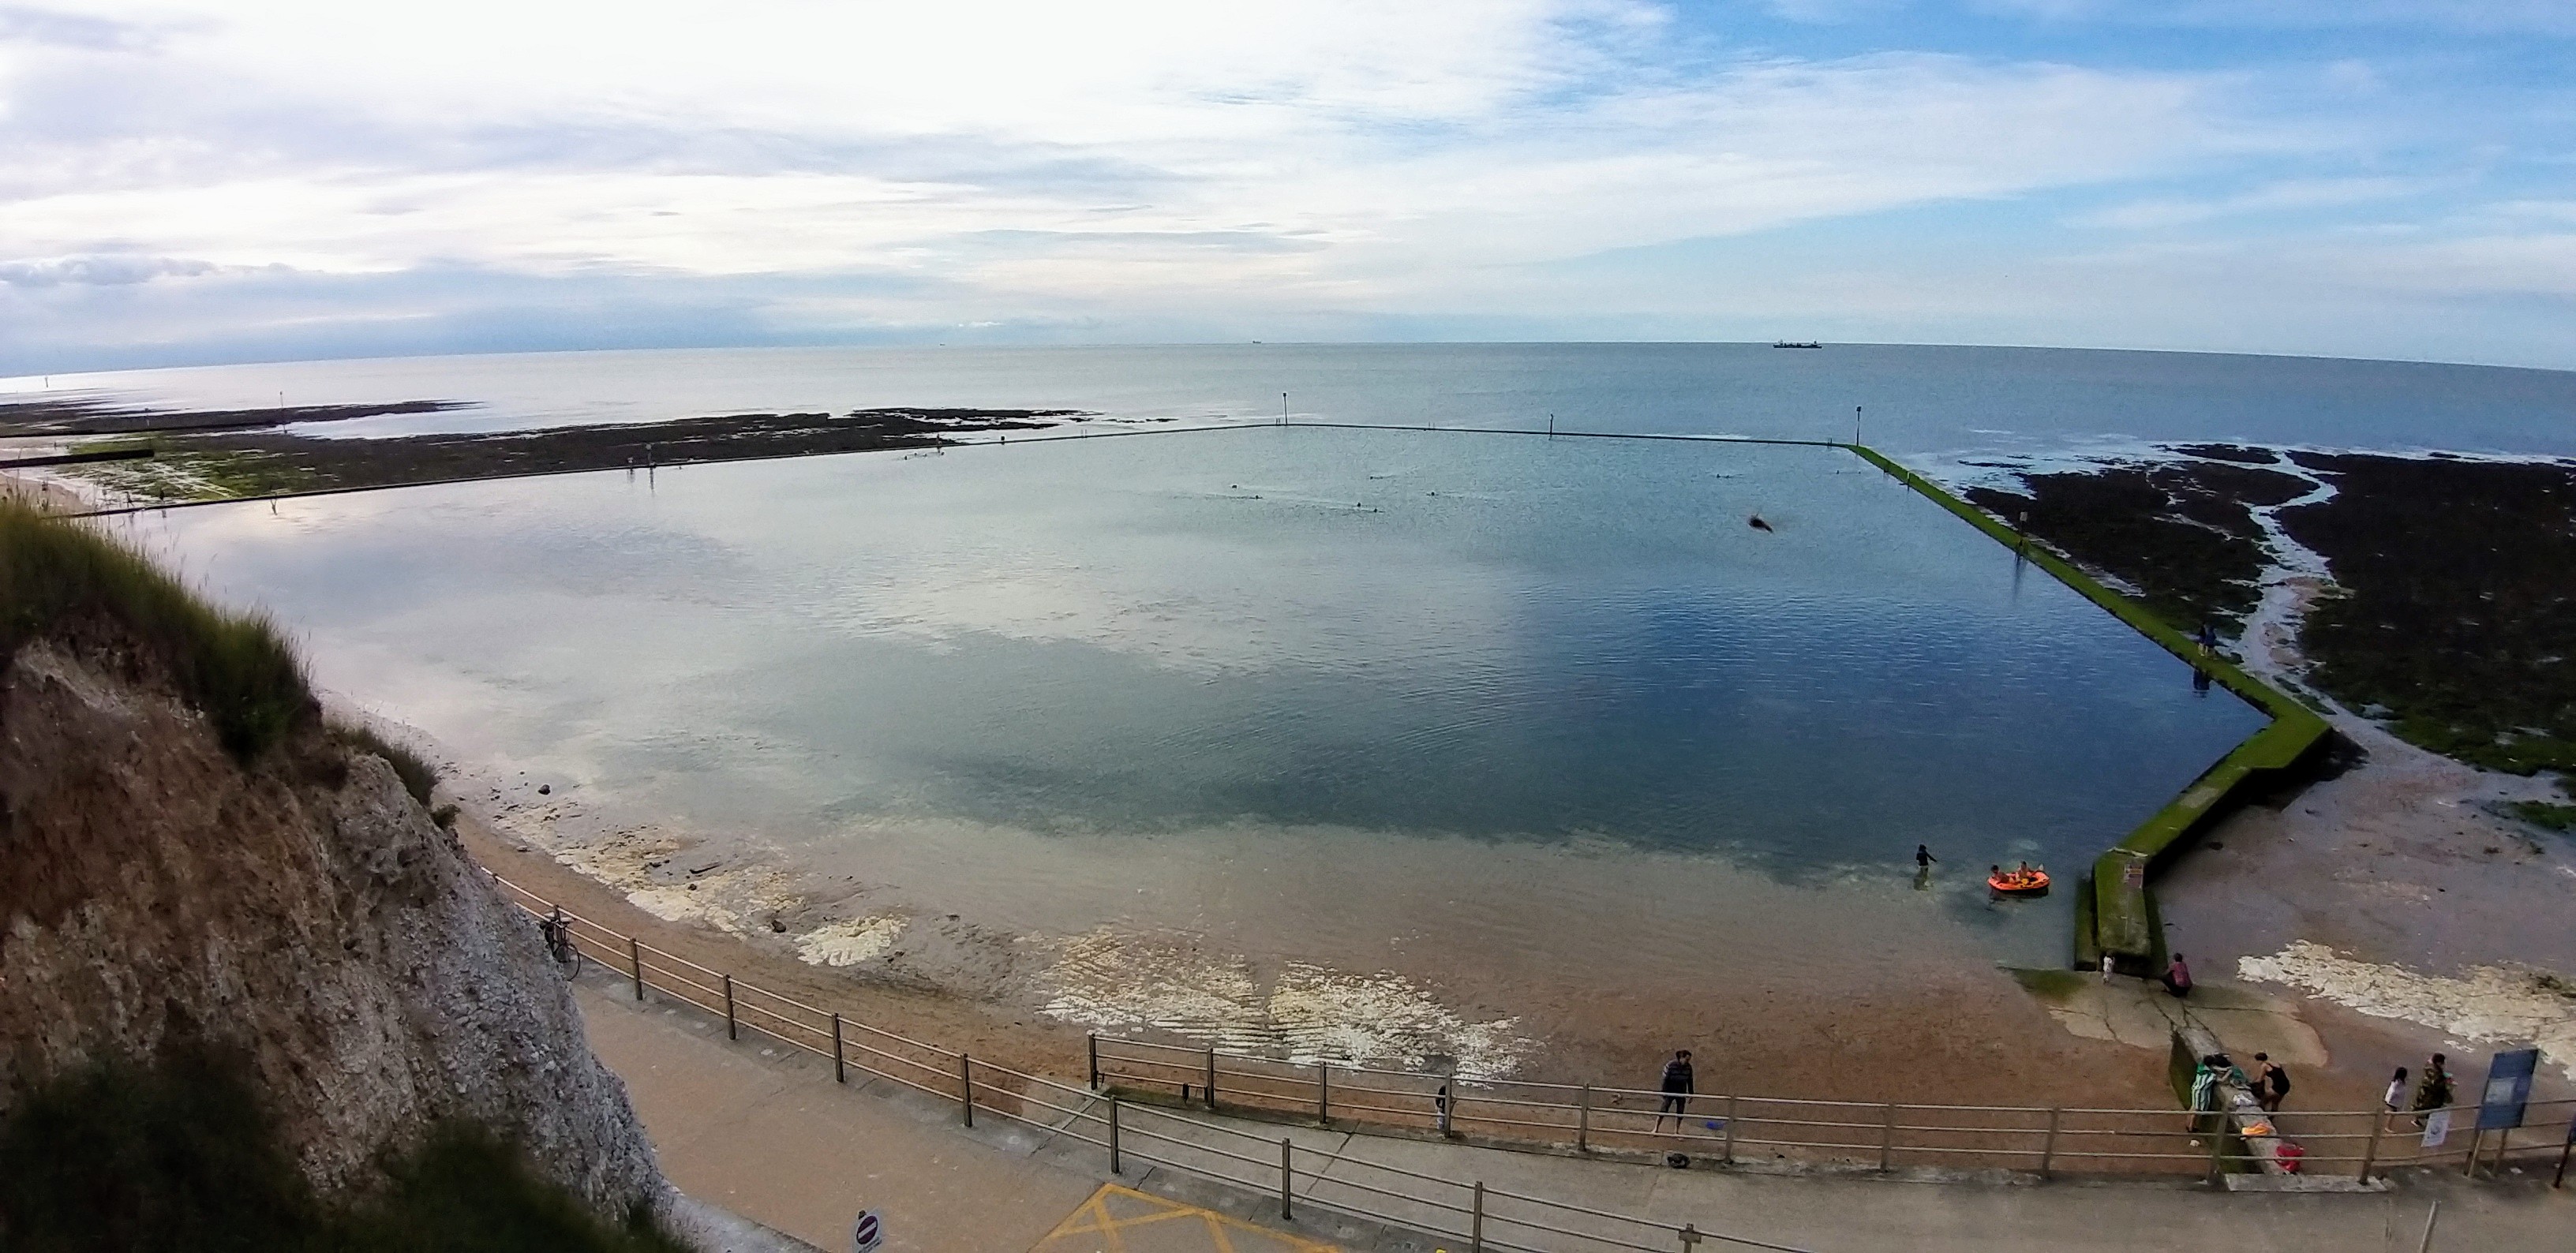 Margate Tidal pool. Filled with sea water and then outside of pool no water, just stretches of seaweed